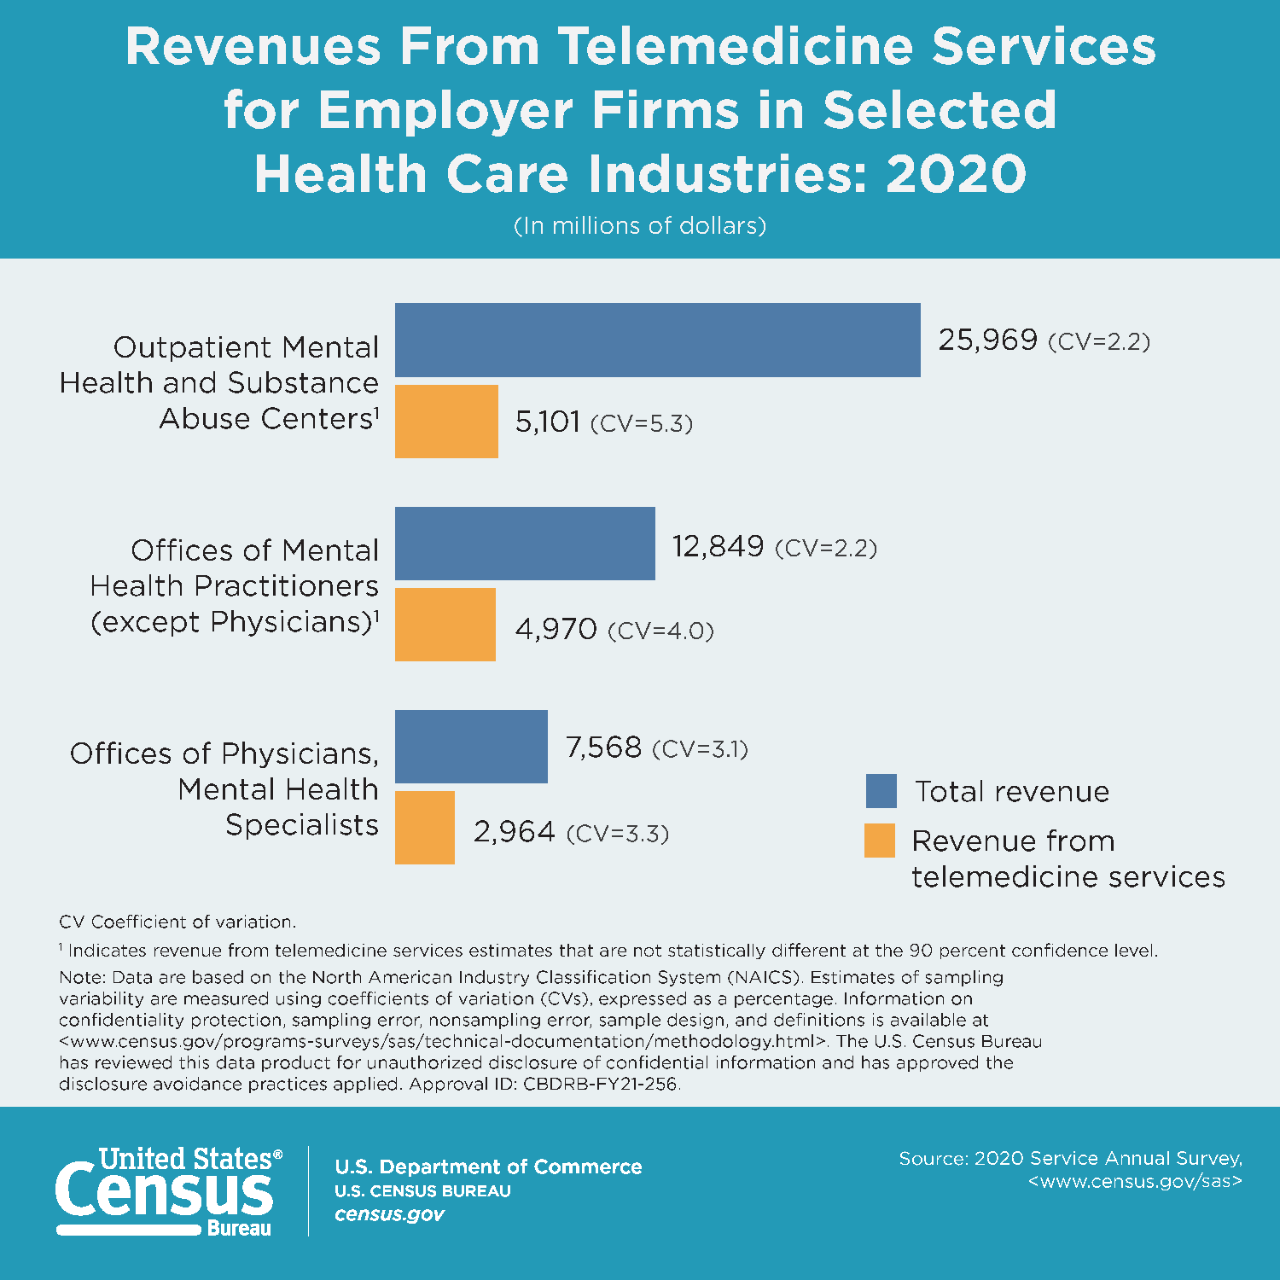 Revenues From Telemedicine Services for Employer Firms in Selected Health Care Industries: 2020